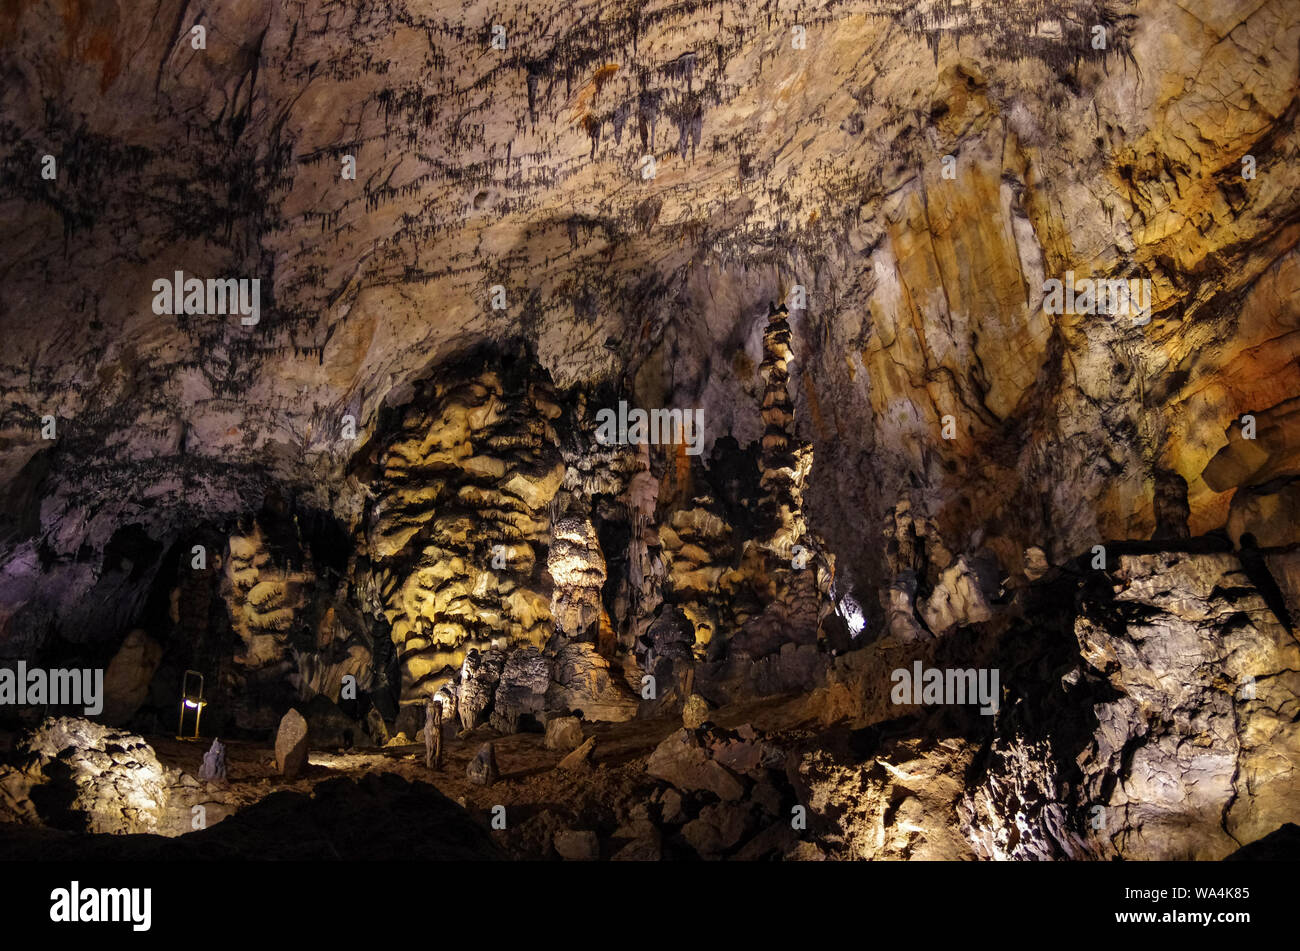 Tourist path in the Baradla cave in Aggtelek, Hungary Stock Photo